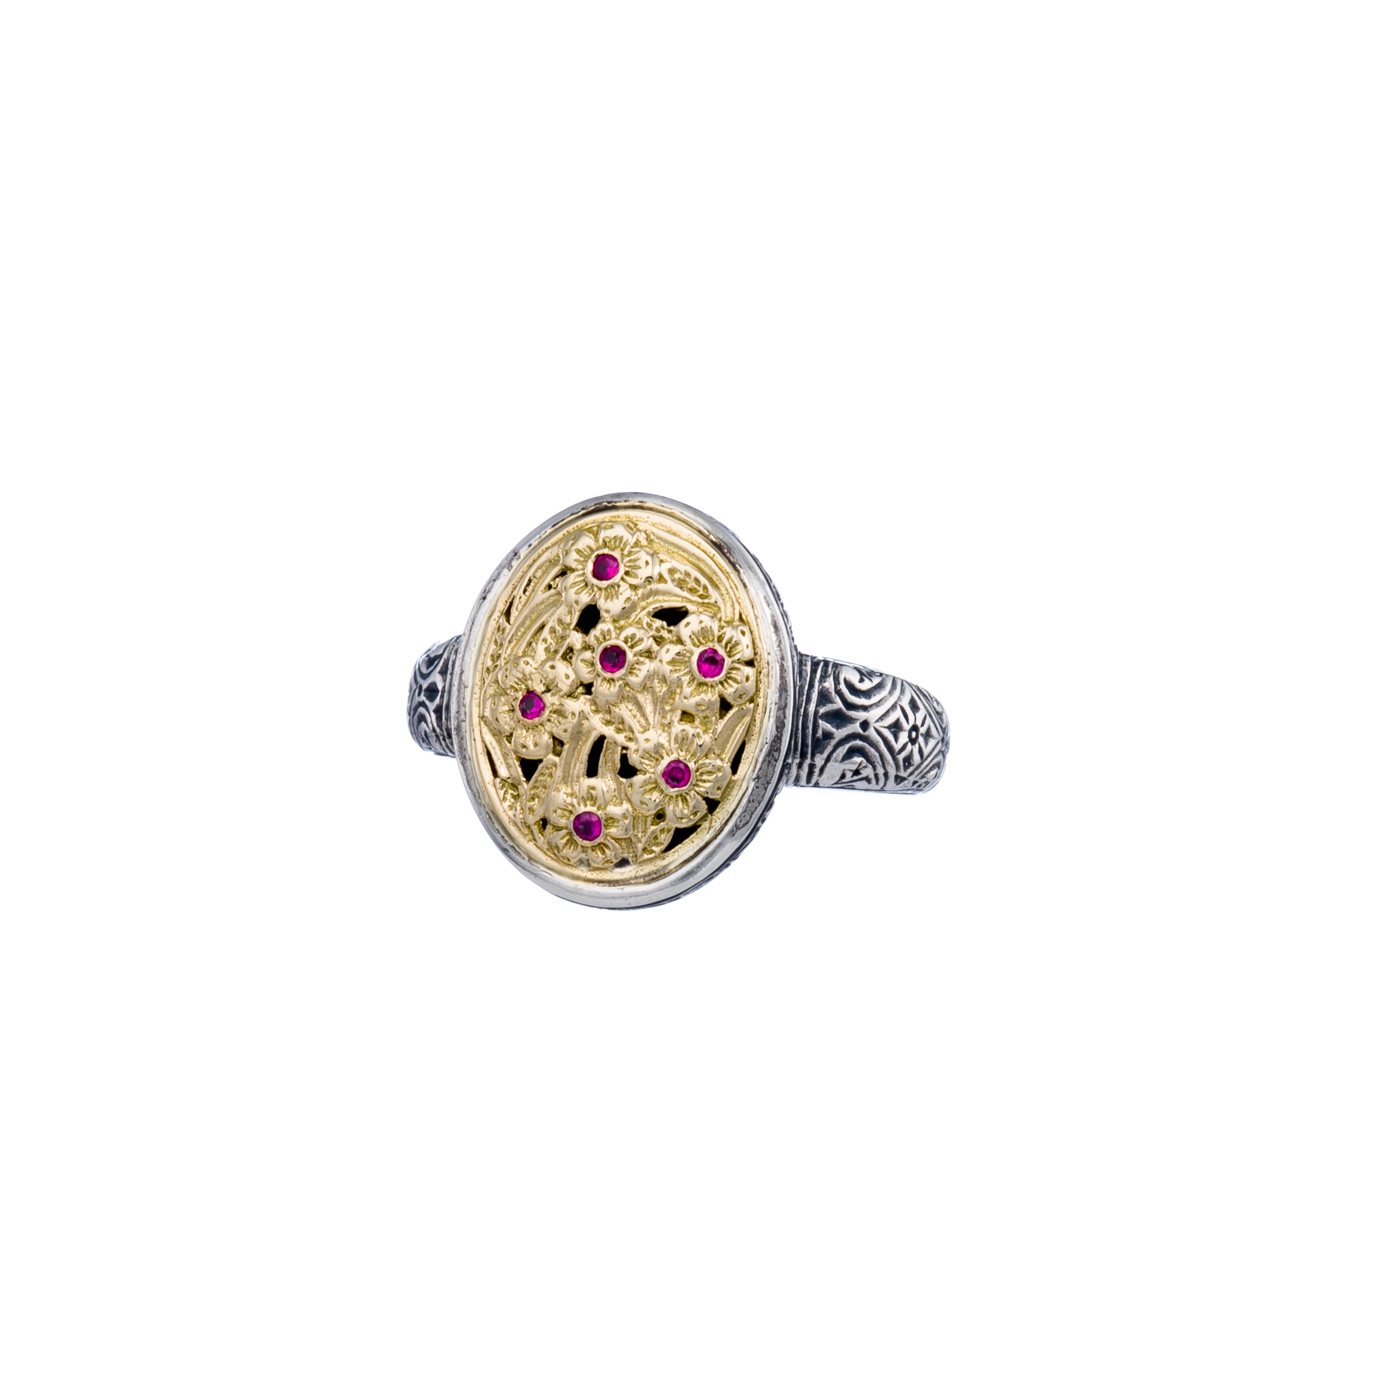 Harmony small Oval Ring in 18K Gold and Sterling Silver with Rubies